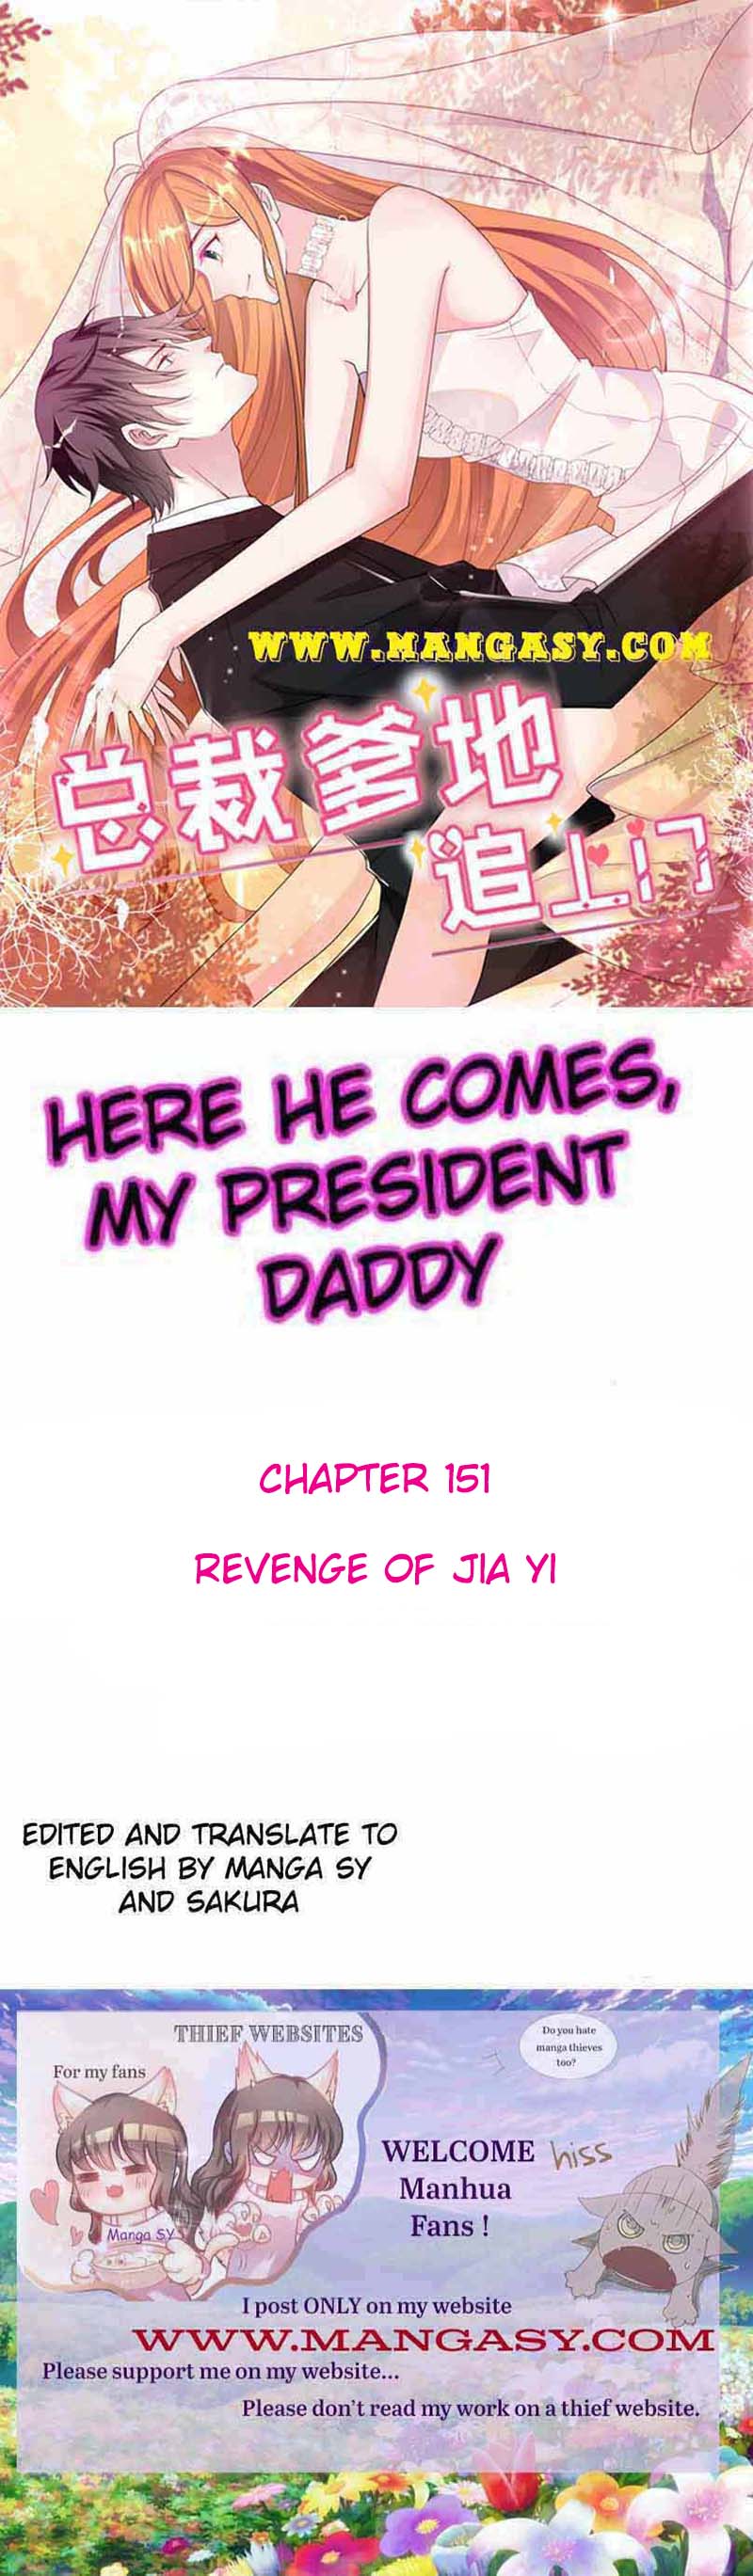 President daddy is chasing you Chapter 151 - page 1